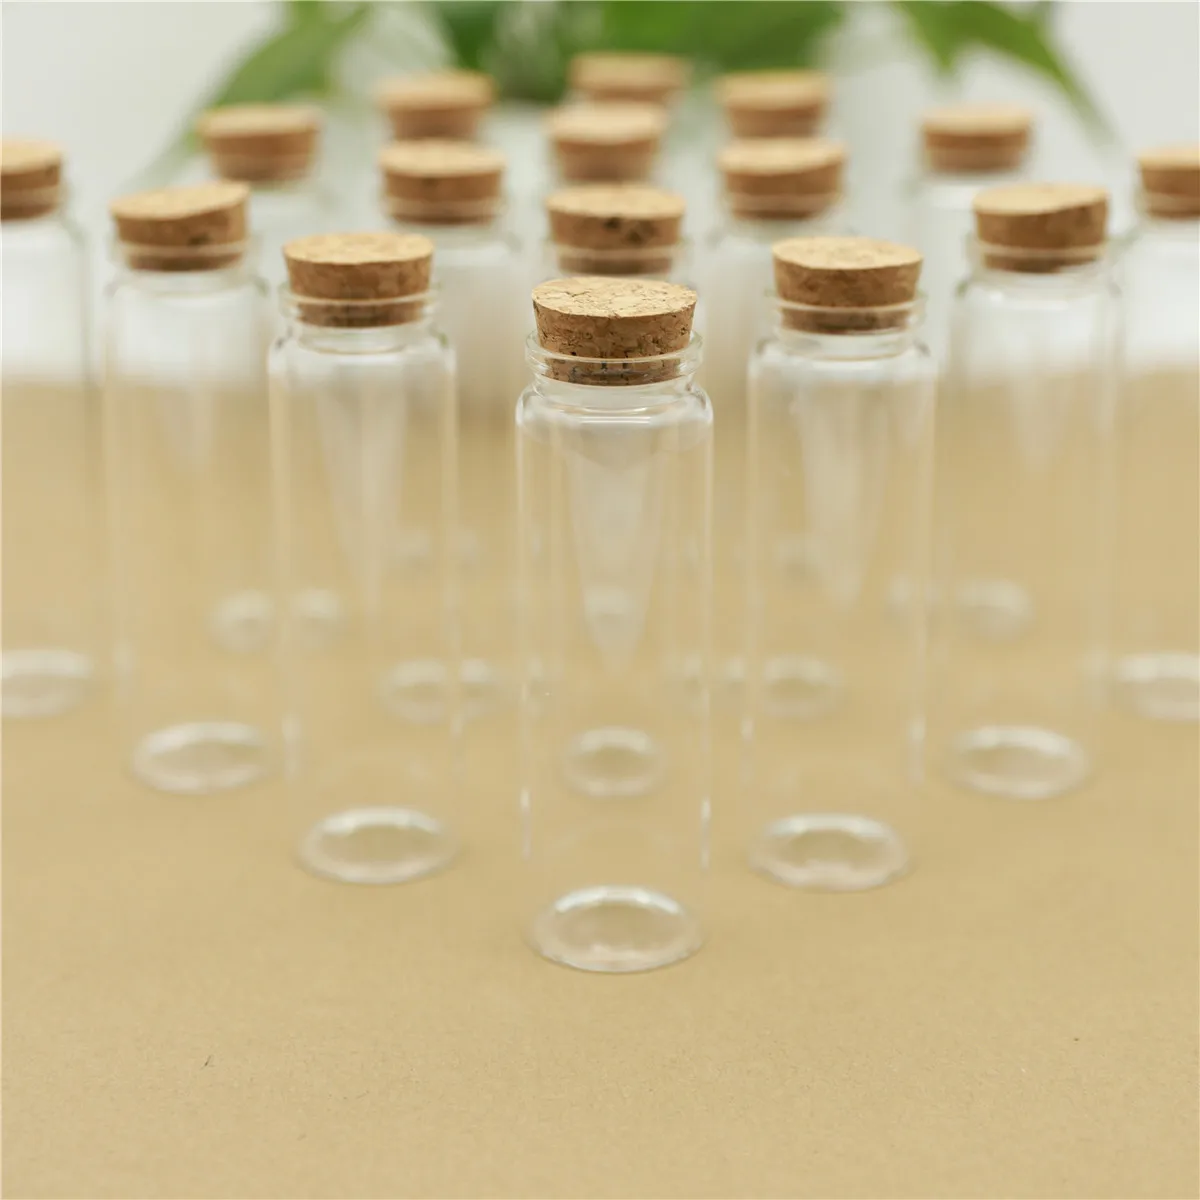 

12PCS/lot 37*120mm 100ml Glass Bottle Storage Jar for Spice Corks spicy Bottles Candy Containers Vials With Cork Stopper Wedding